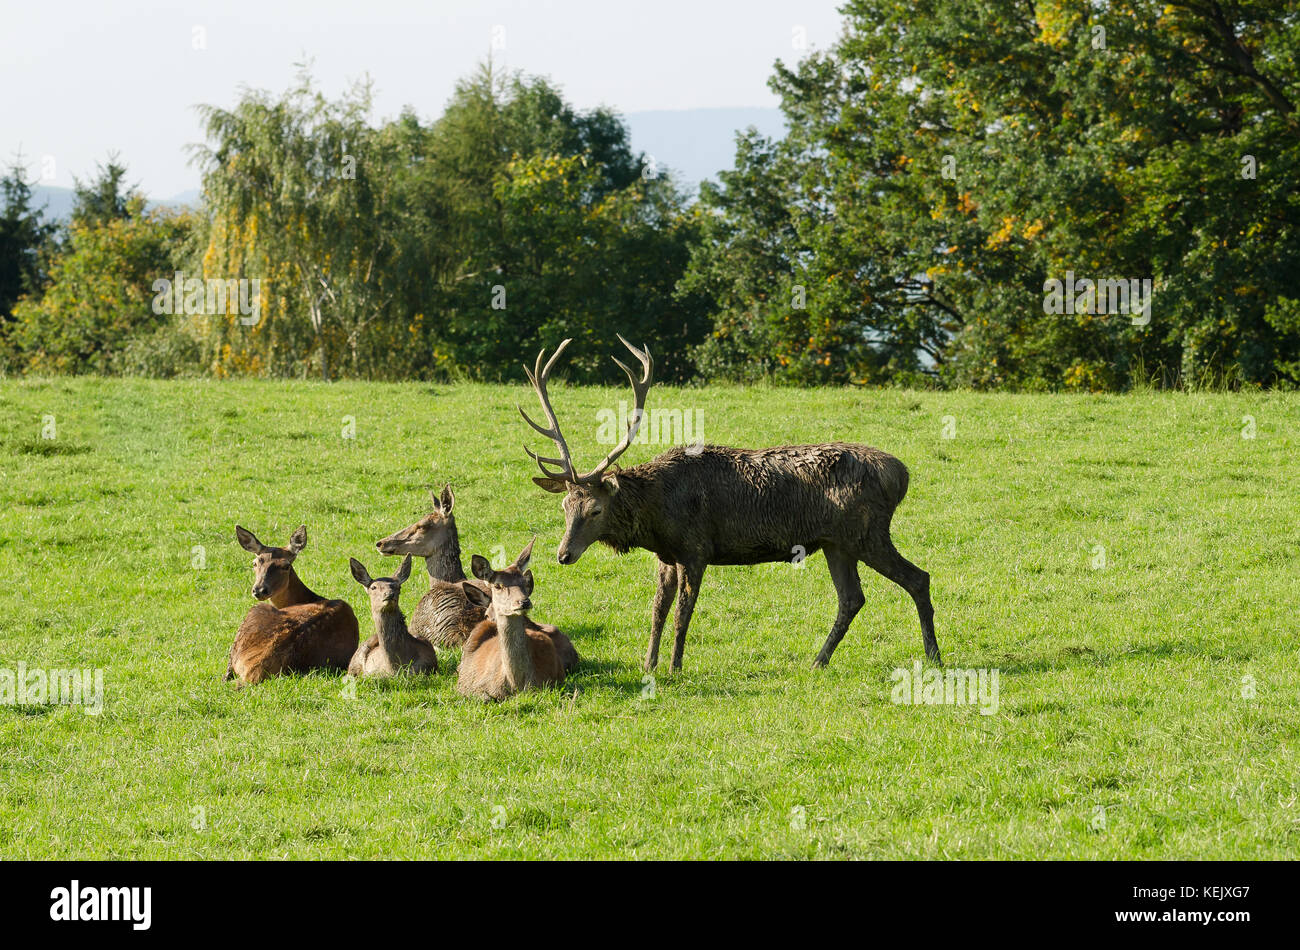 European red deer herd on a paddock in the summer sun. Mature stag (male) and four hinds (females). Group of Cervus elaphus in Western Europe. Photo. Stock Photo